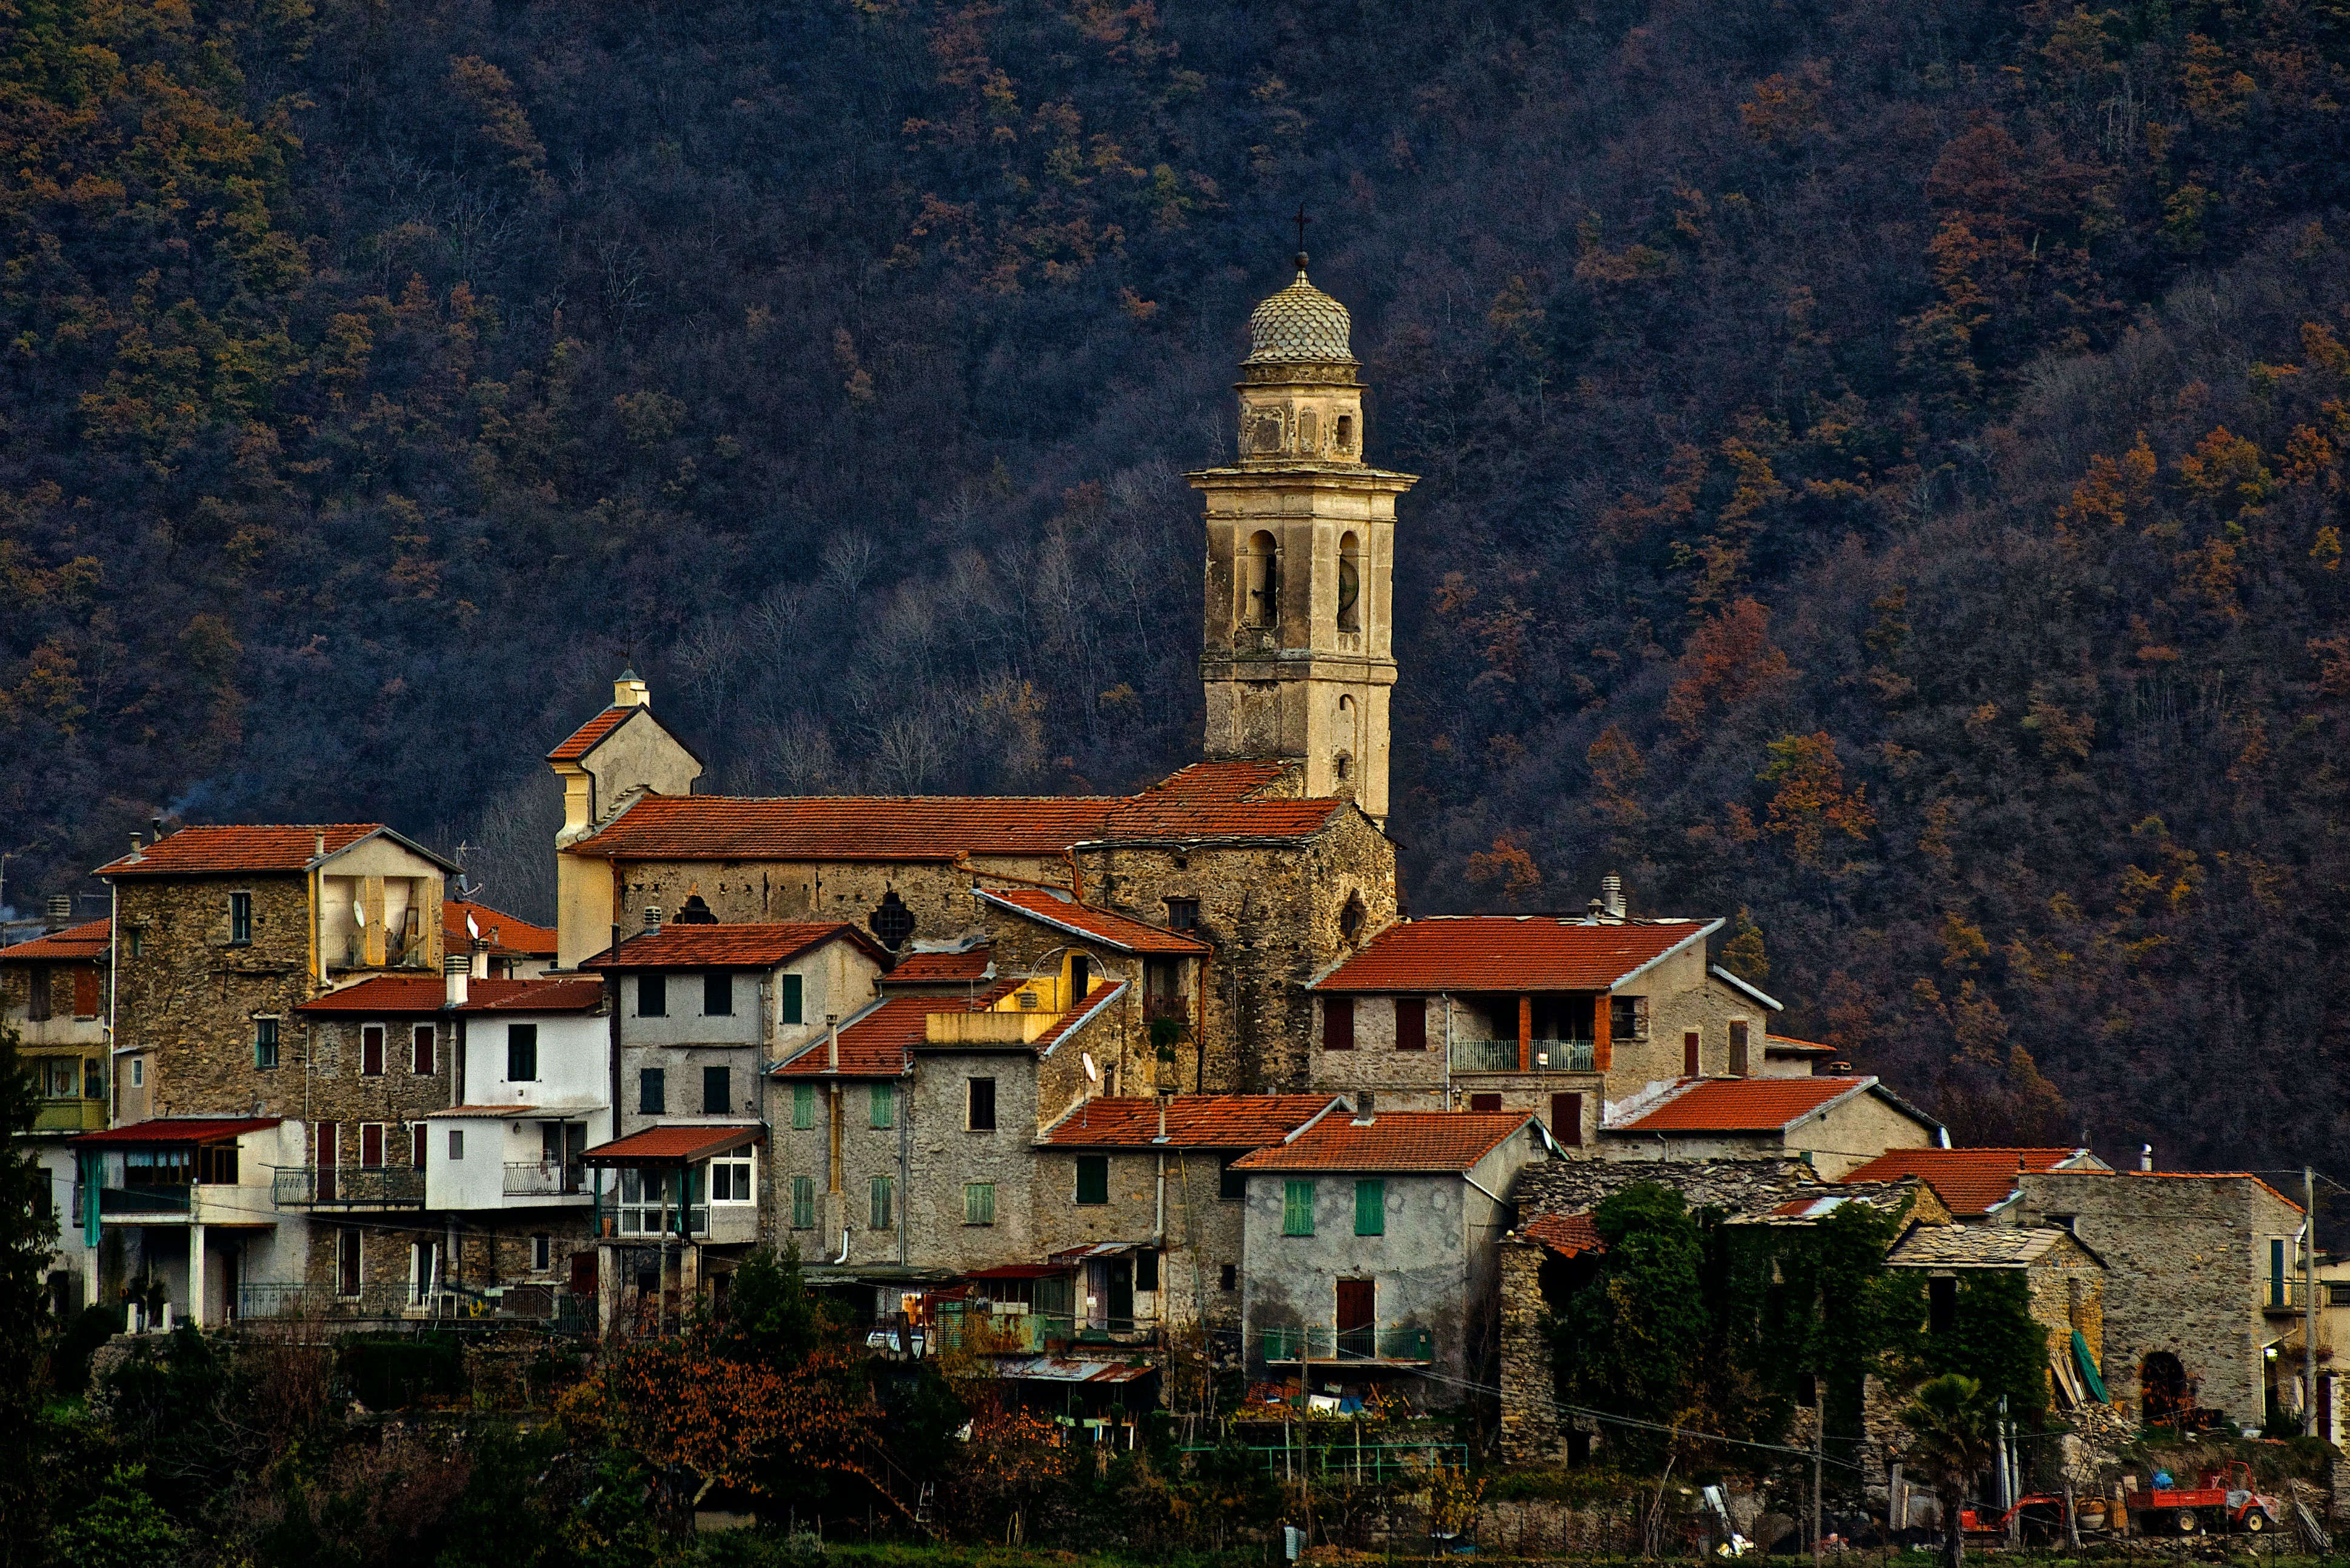 This beautiful Italian town has a dark past of witchcraft